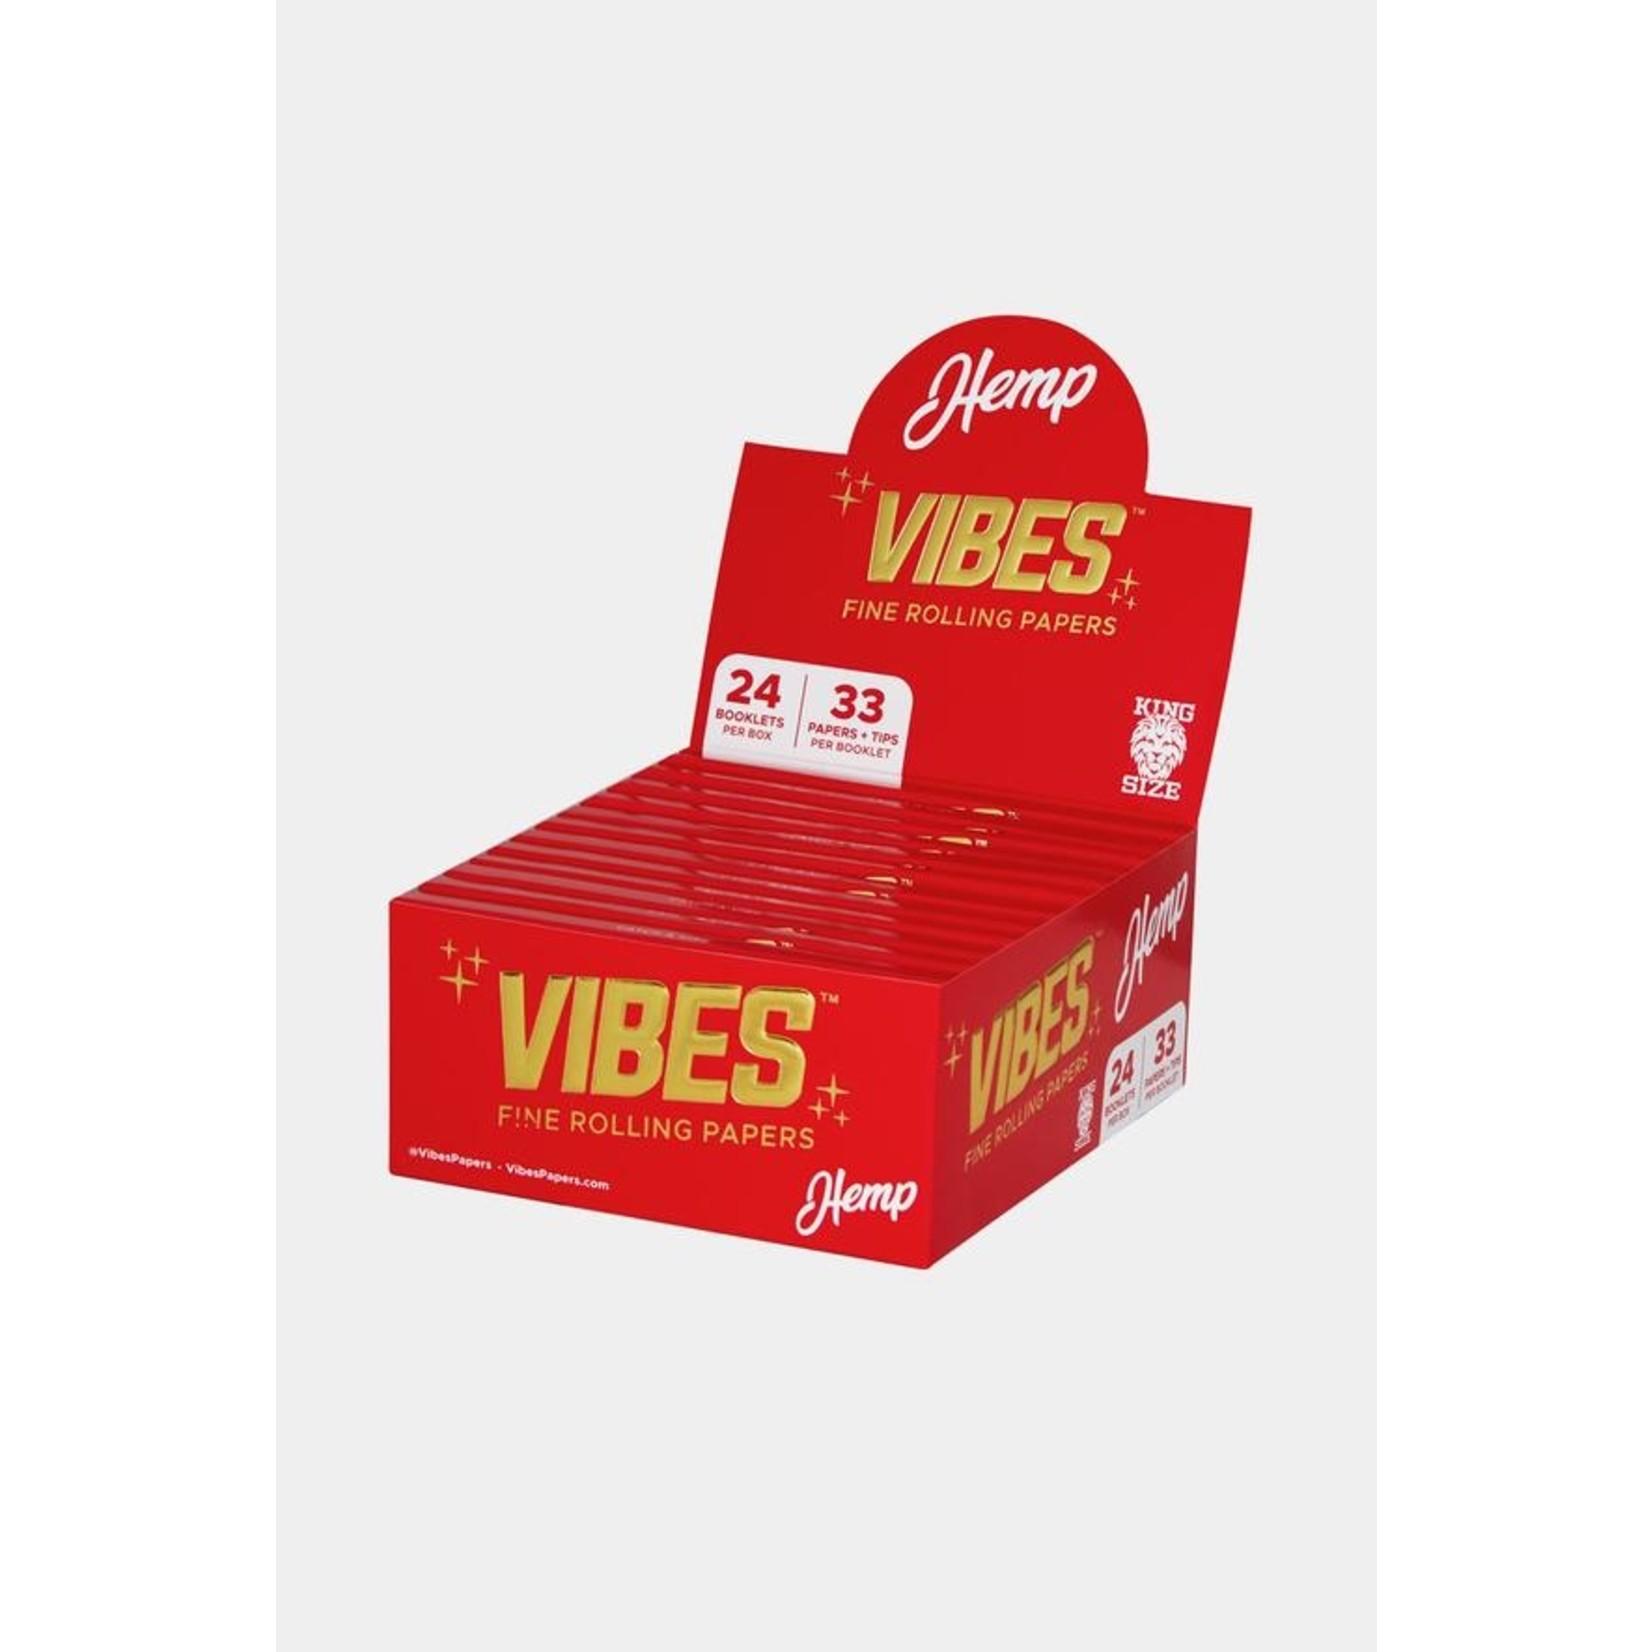 VIBES Vibes Hemp King Size Slim Rolling Papers